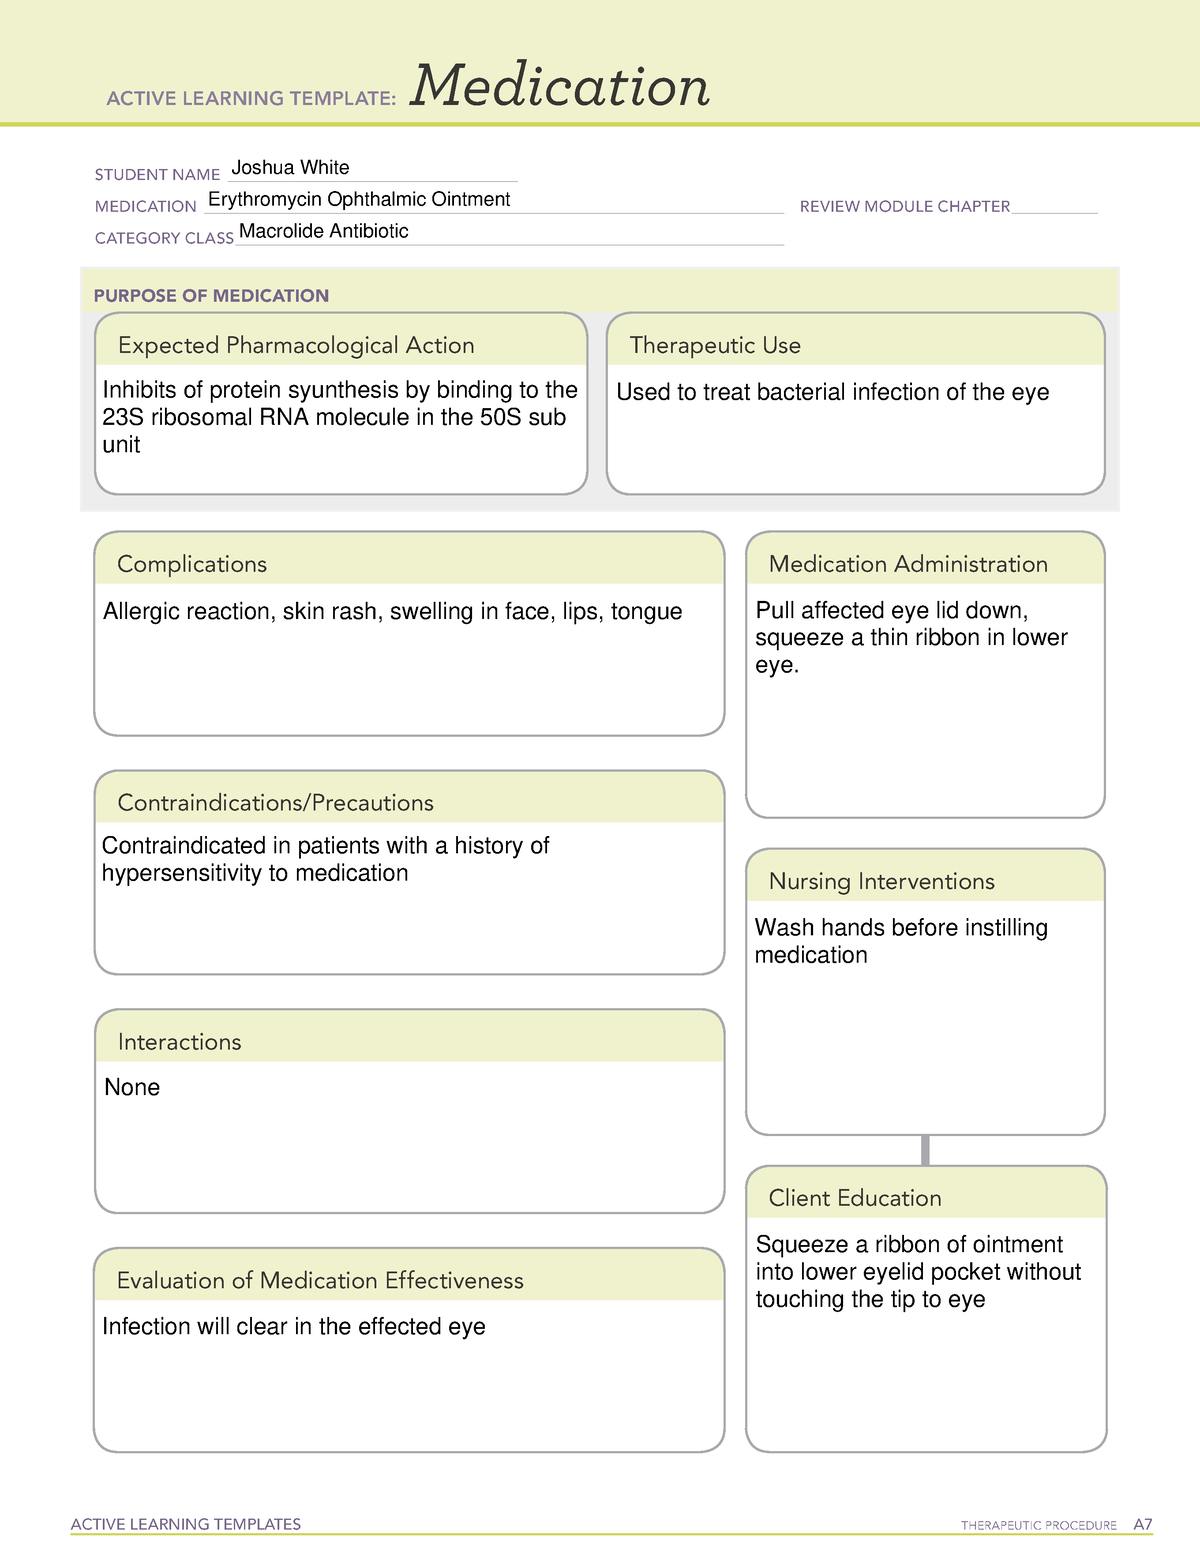 erythromycin-ophthalmic-ointment-active-learning-templates